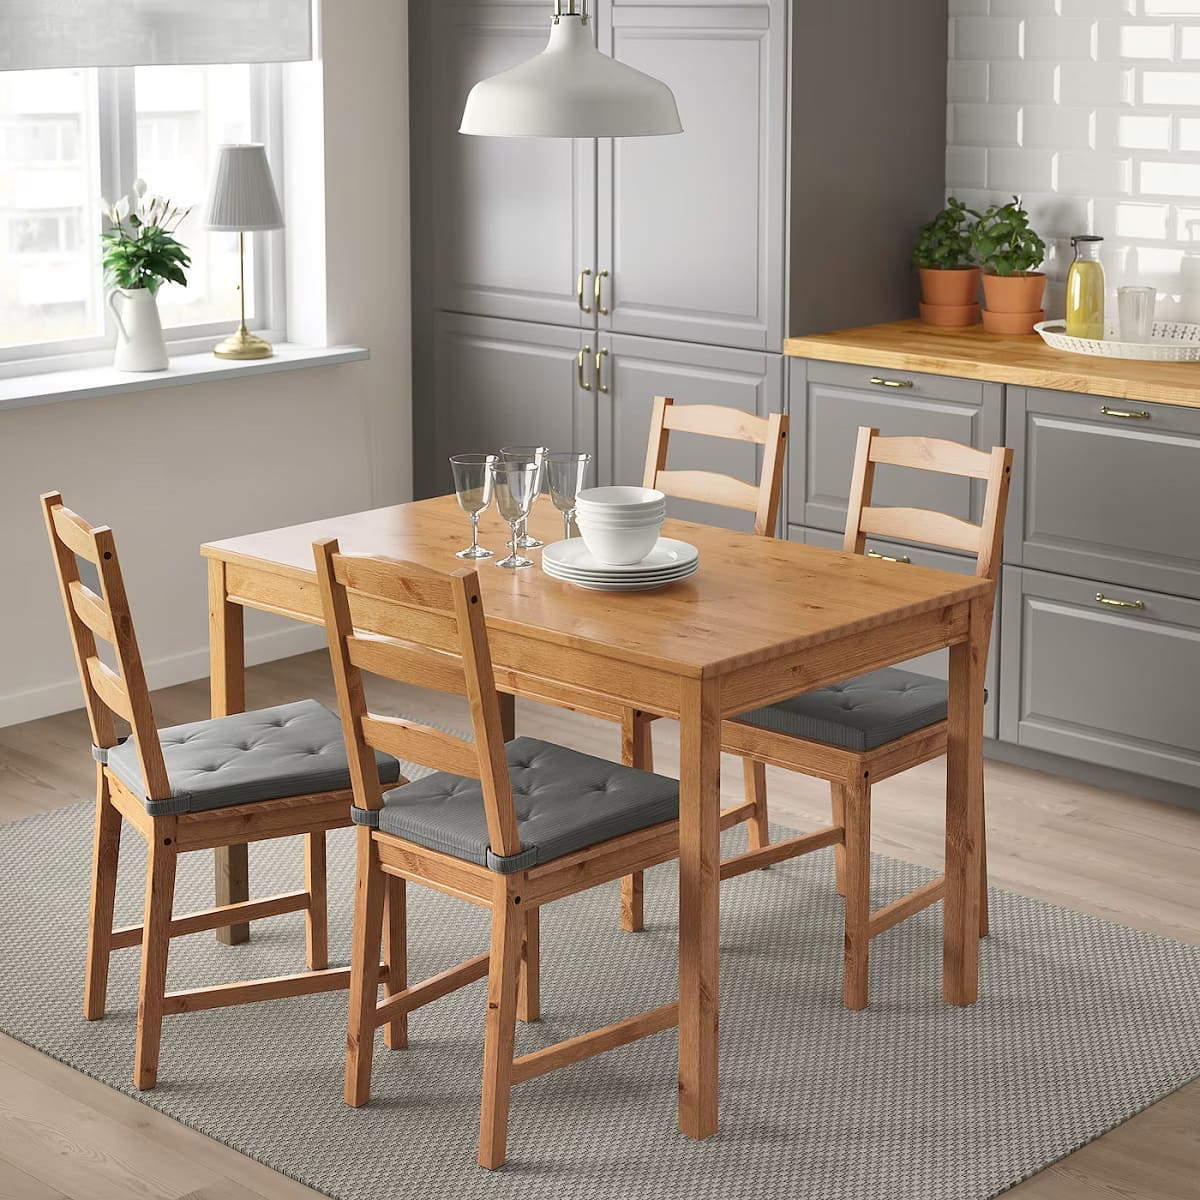 How Can You Enhance The Comfort Of Dining Room Chairs?